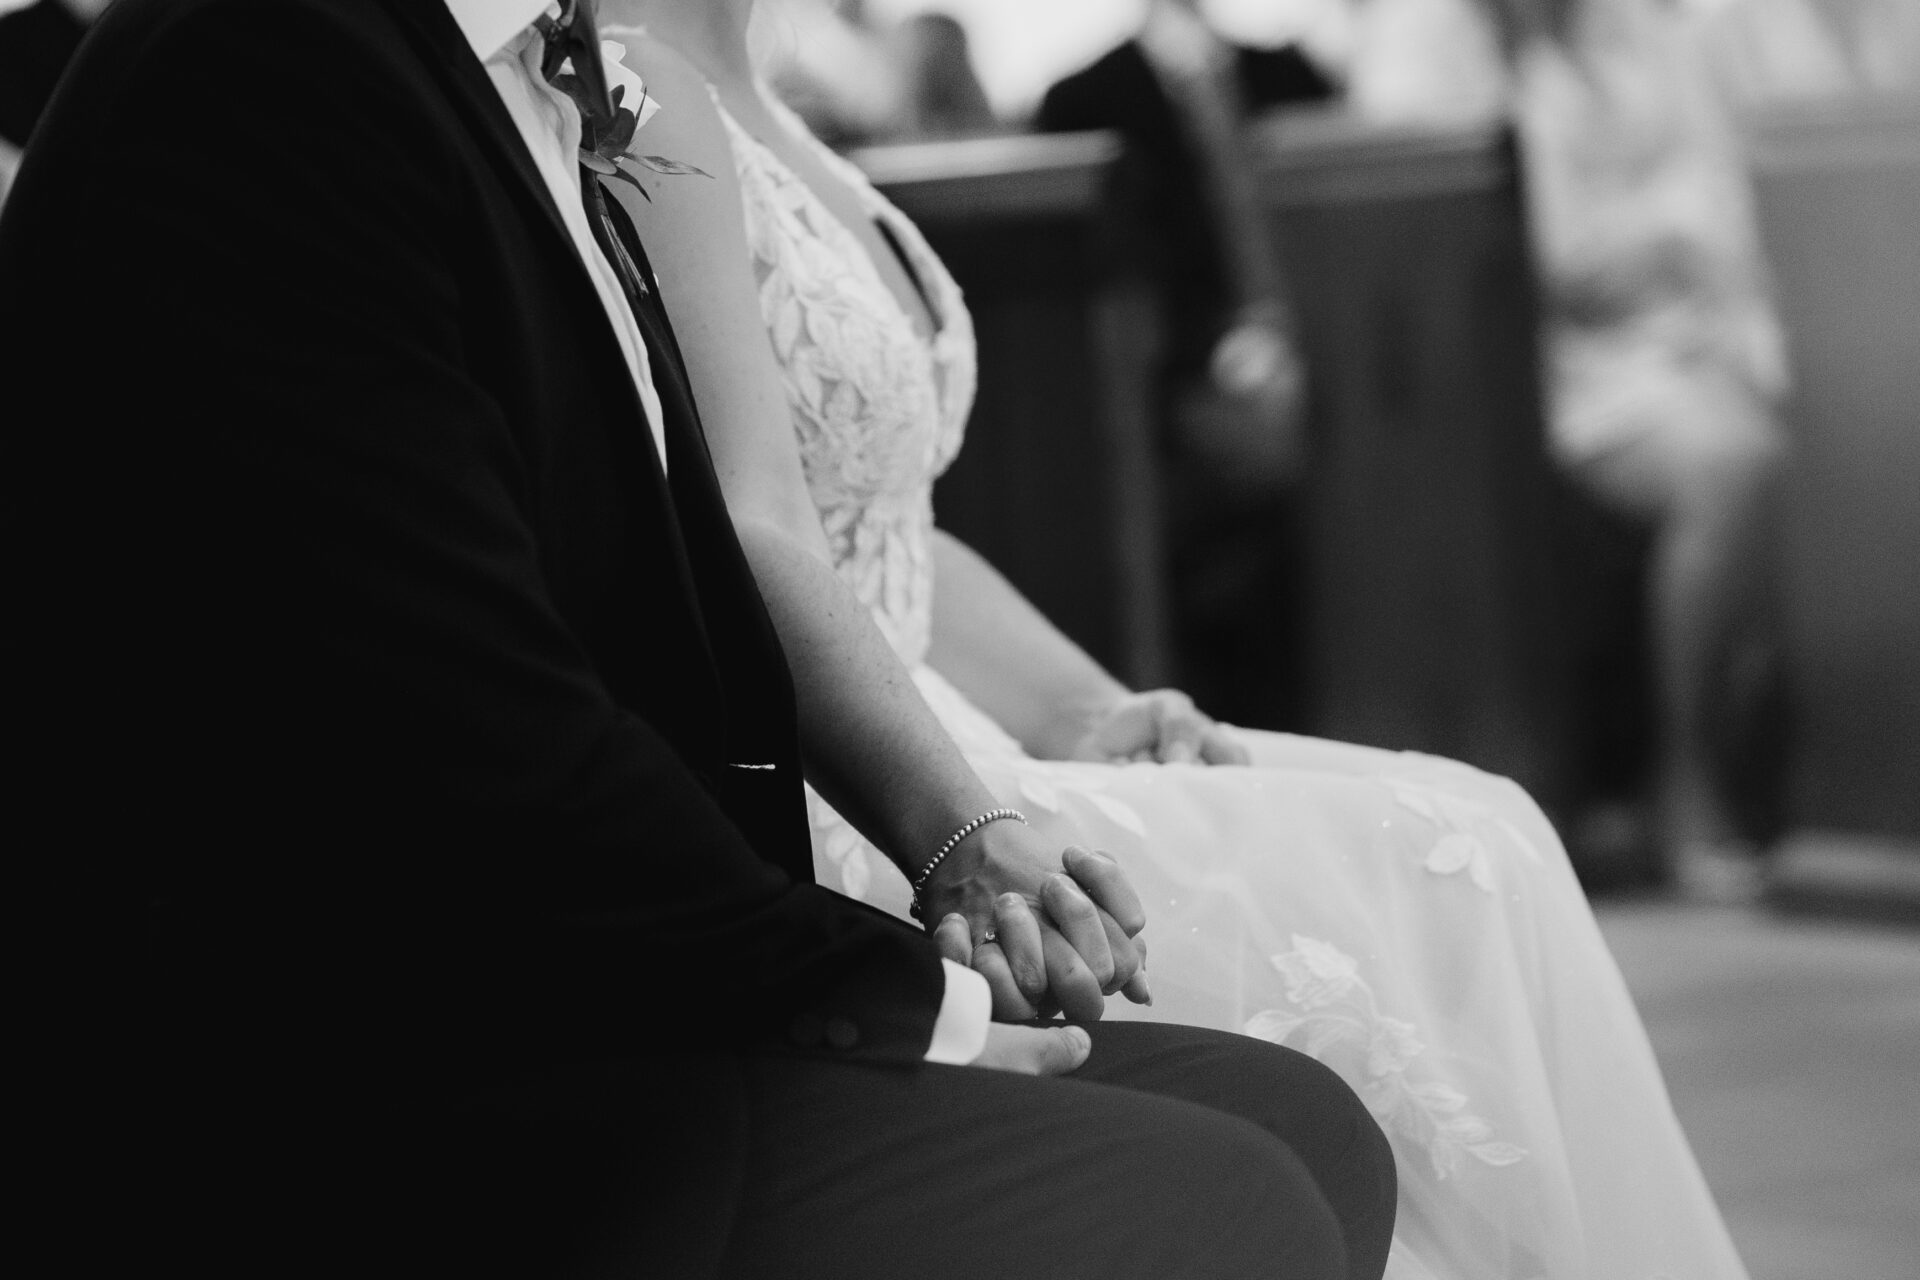 The bride and groom hold hands during the wedding ceremony